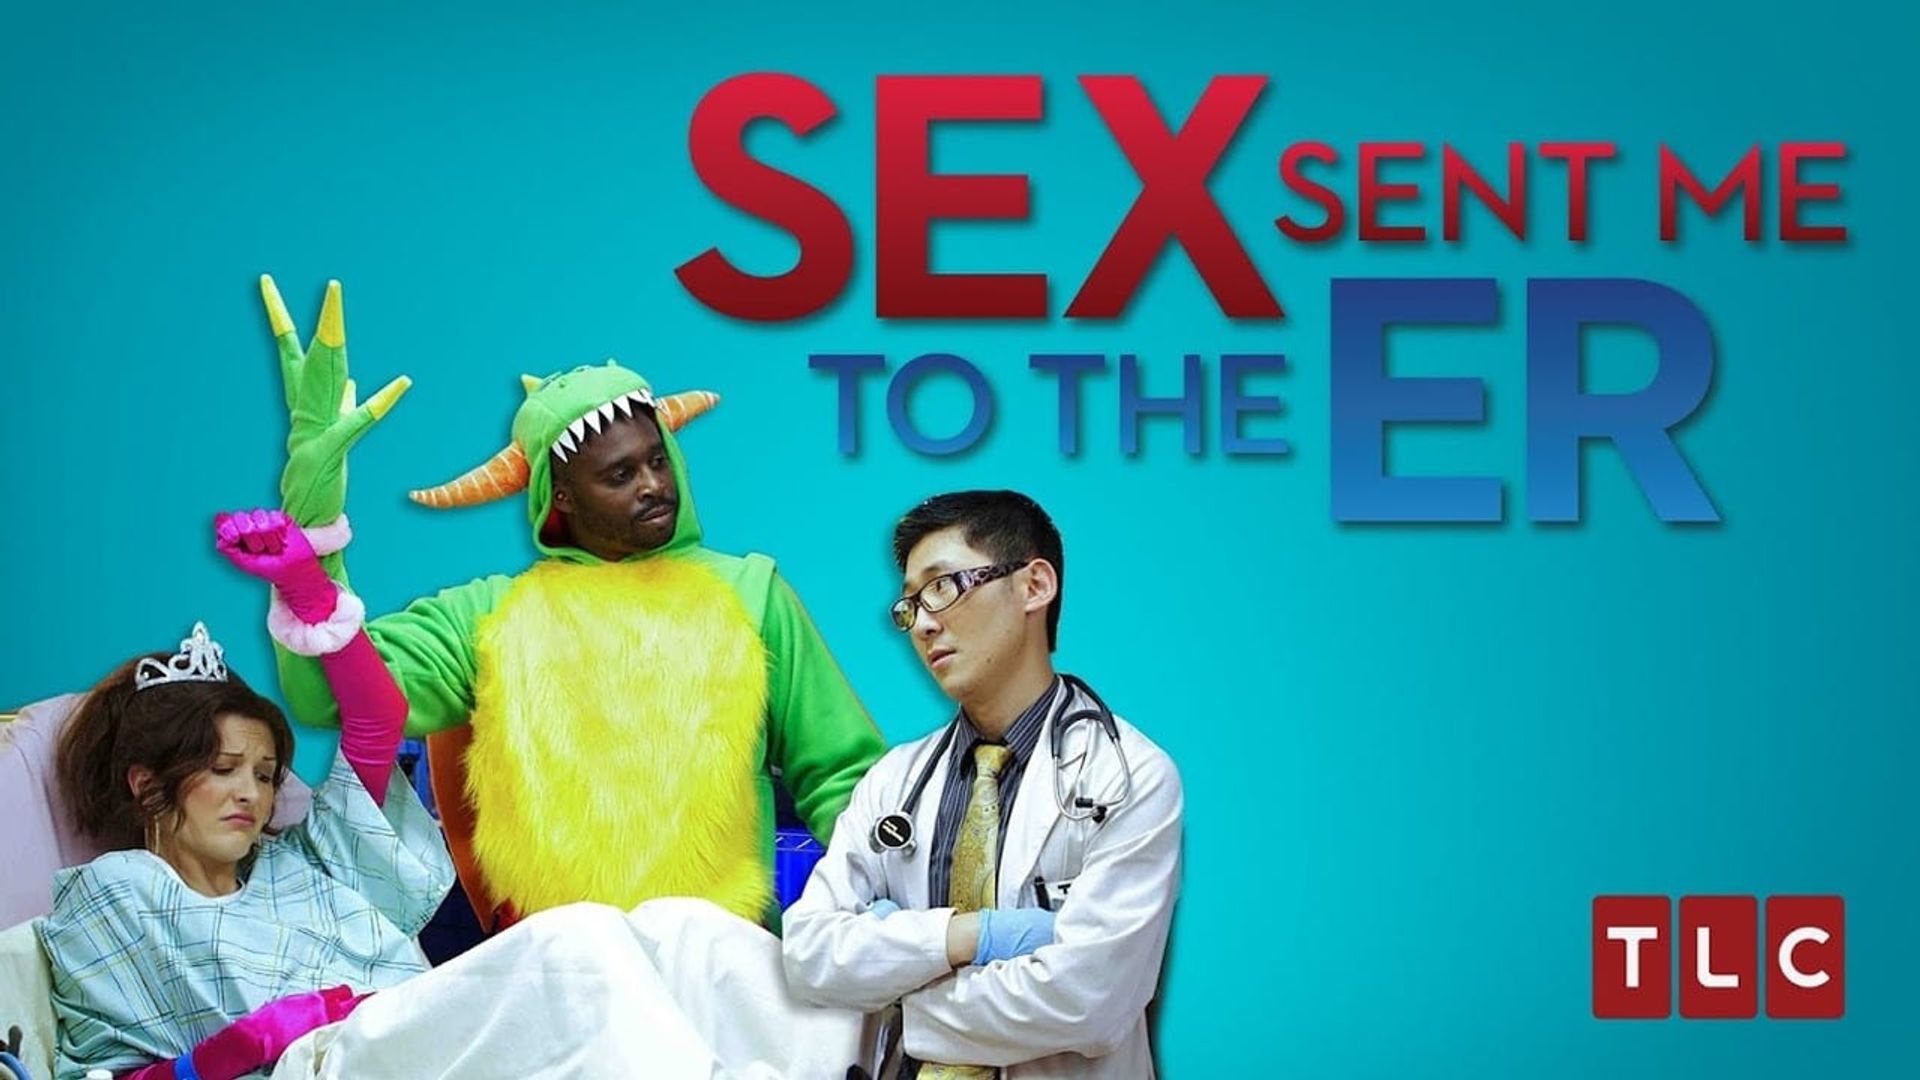 Sex Sent Me to the ER background